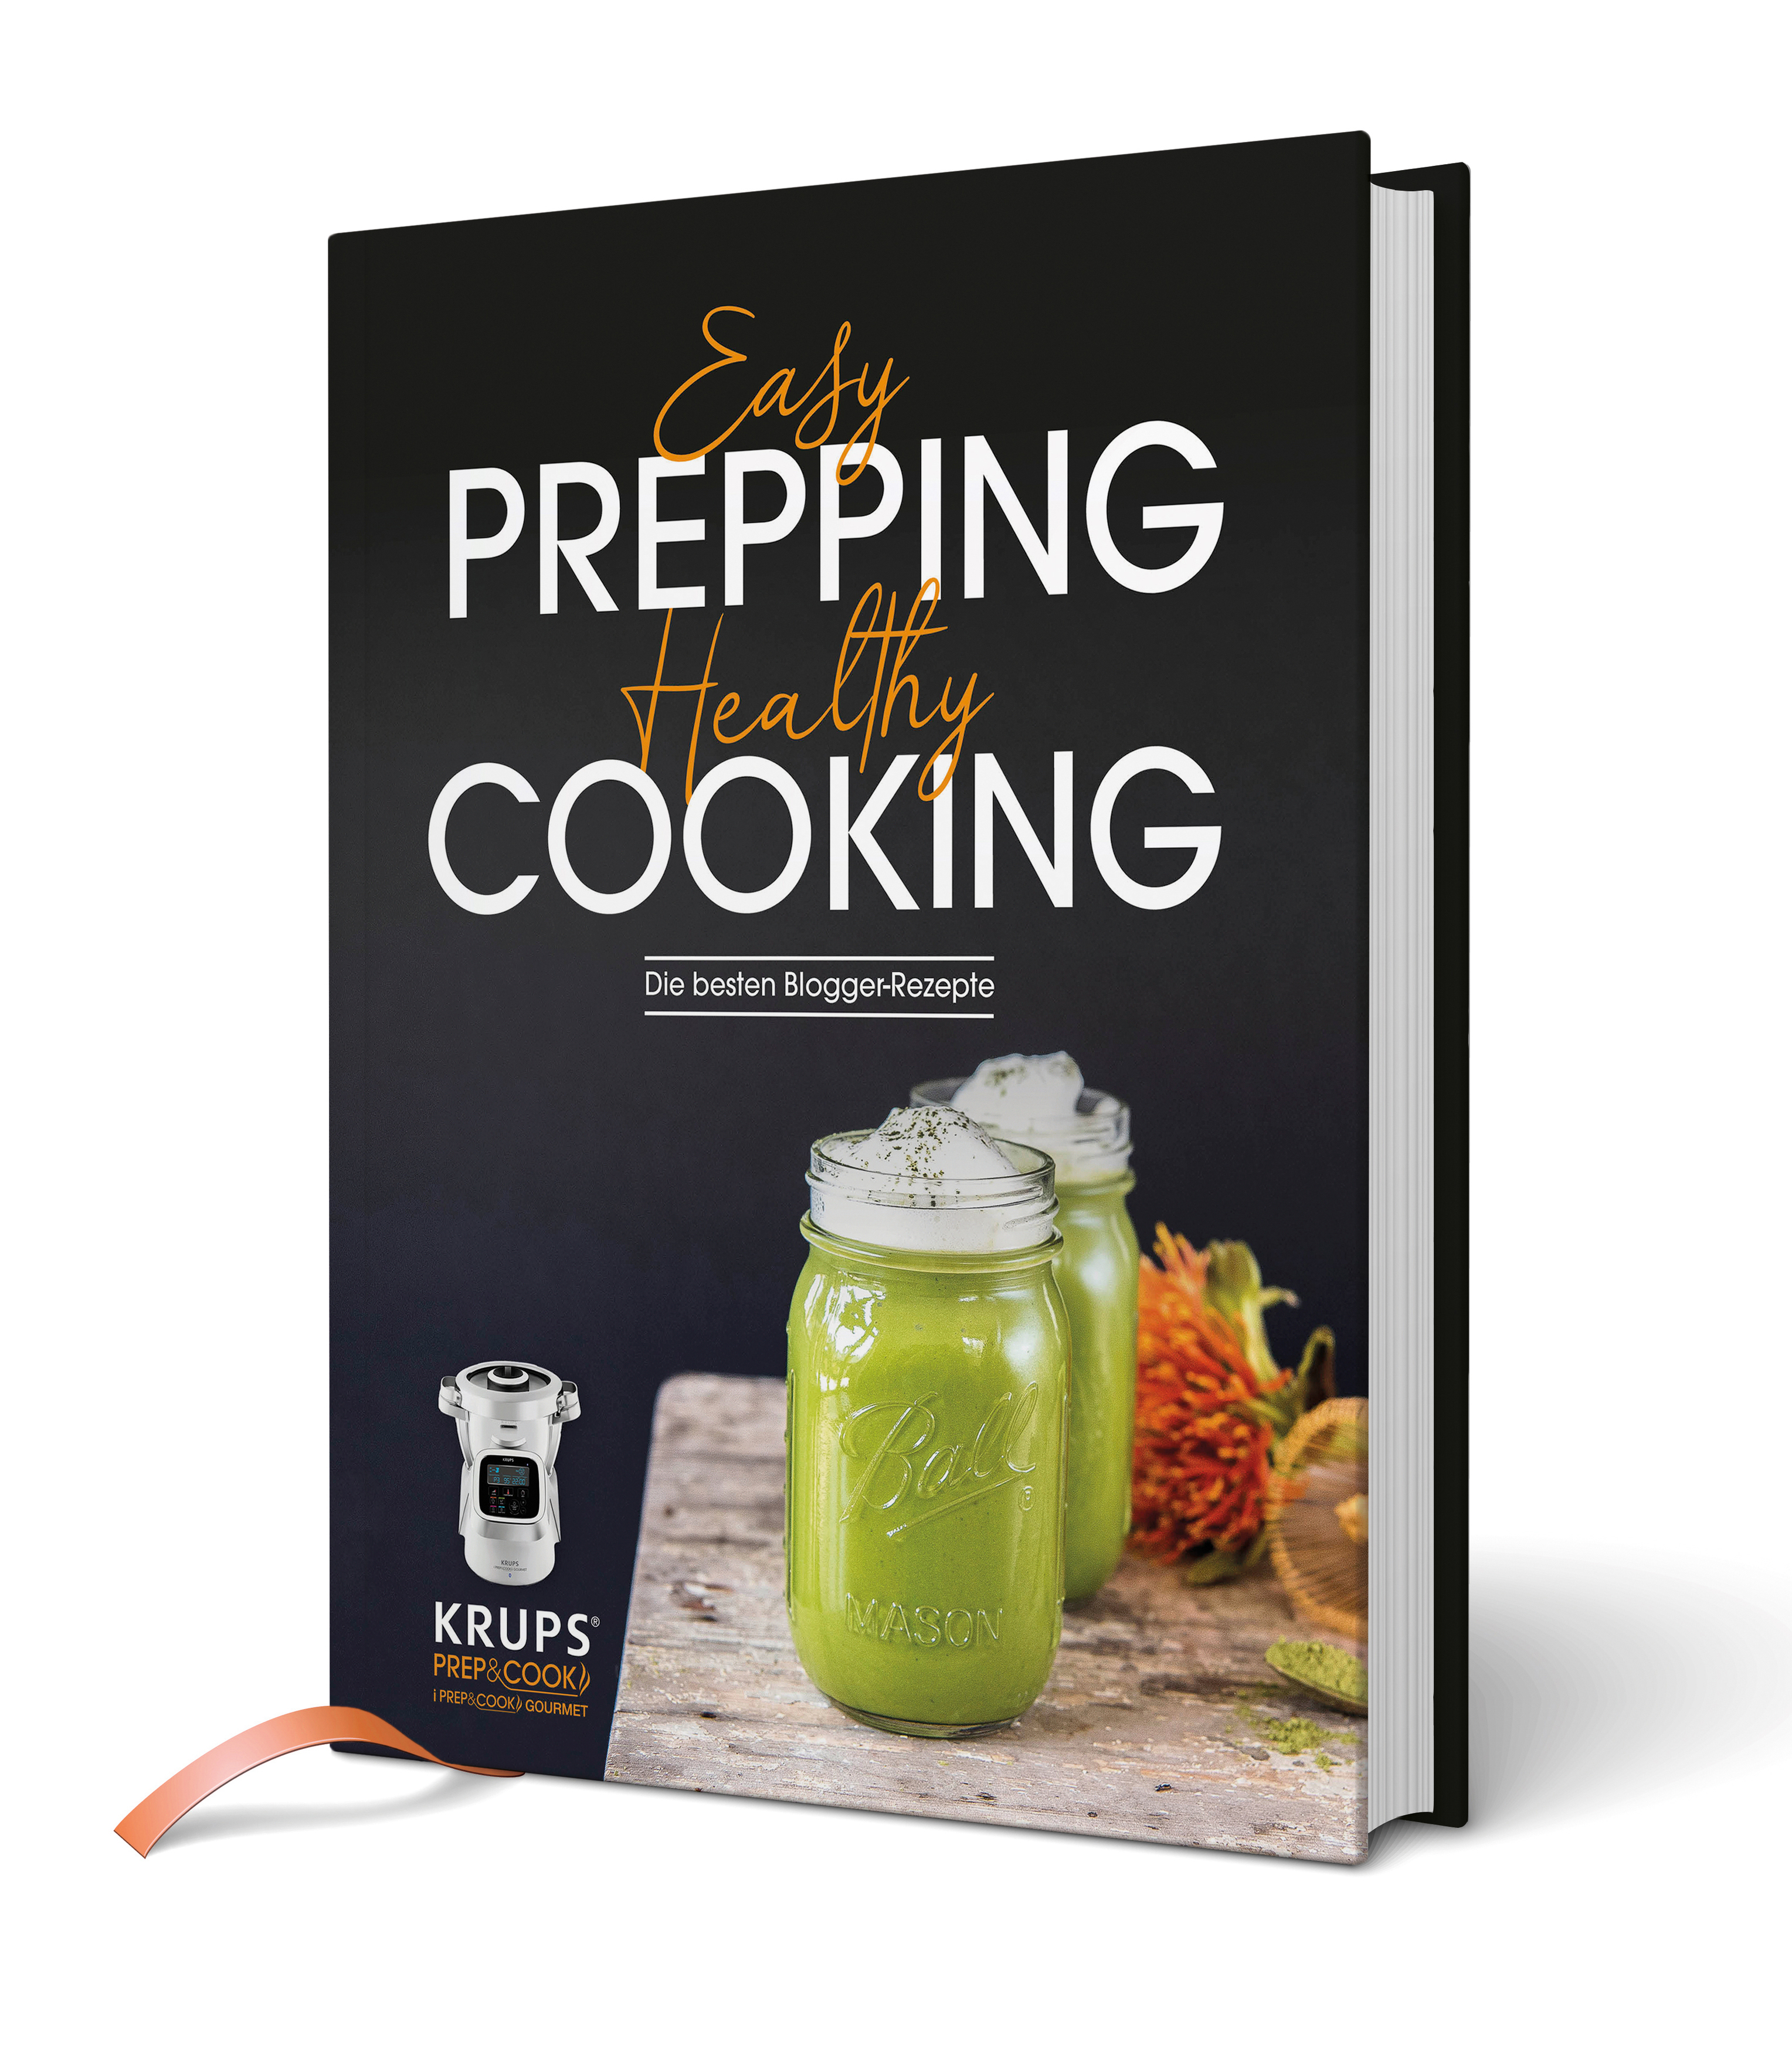 KRUPS HP1234.01 Prep&Cook Blogger Kochbuch Cooking Prepping, Easy Healthy